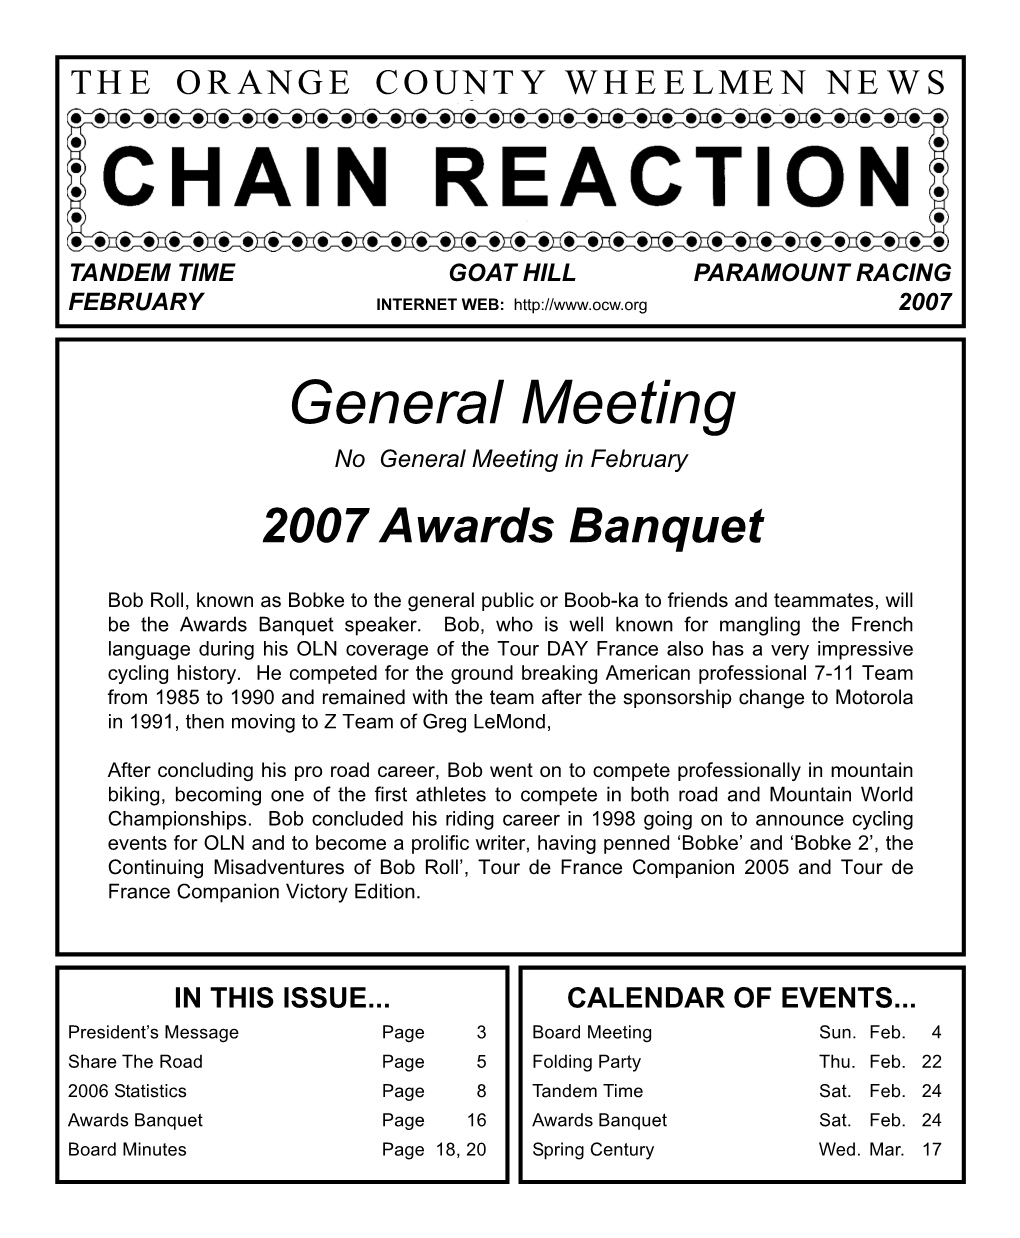 General Meeting No General Meeting in February 2007 Awards Banquet